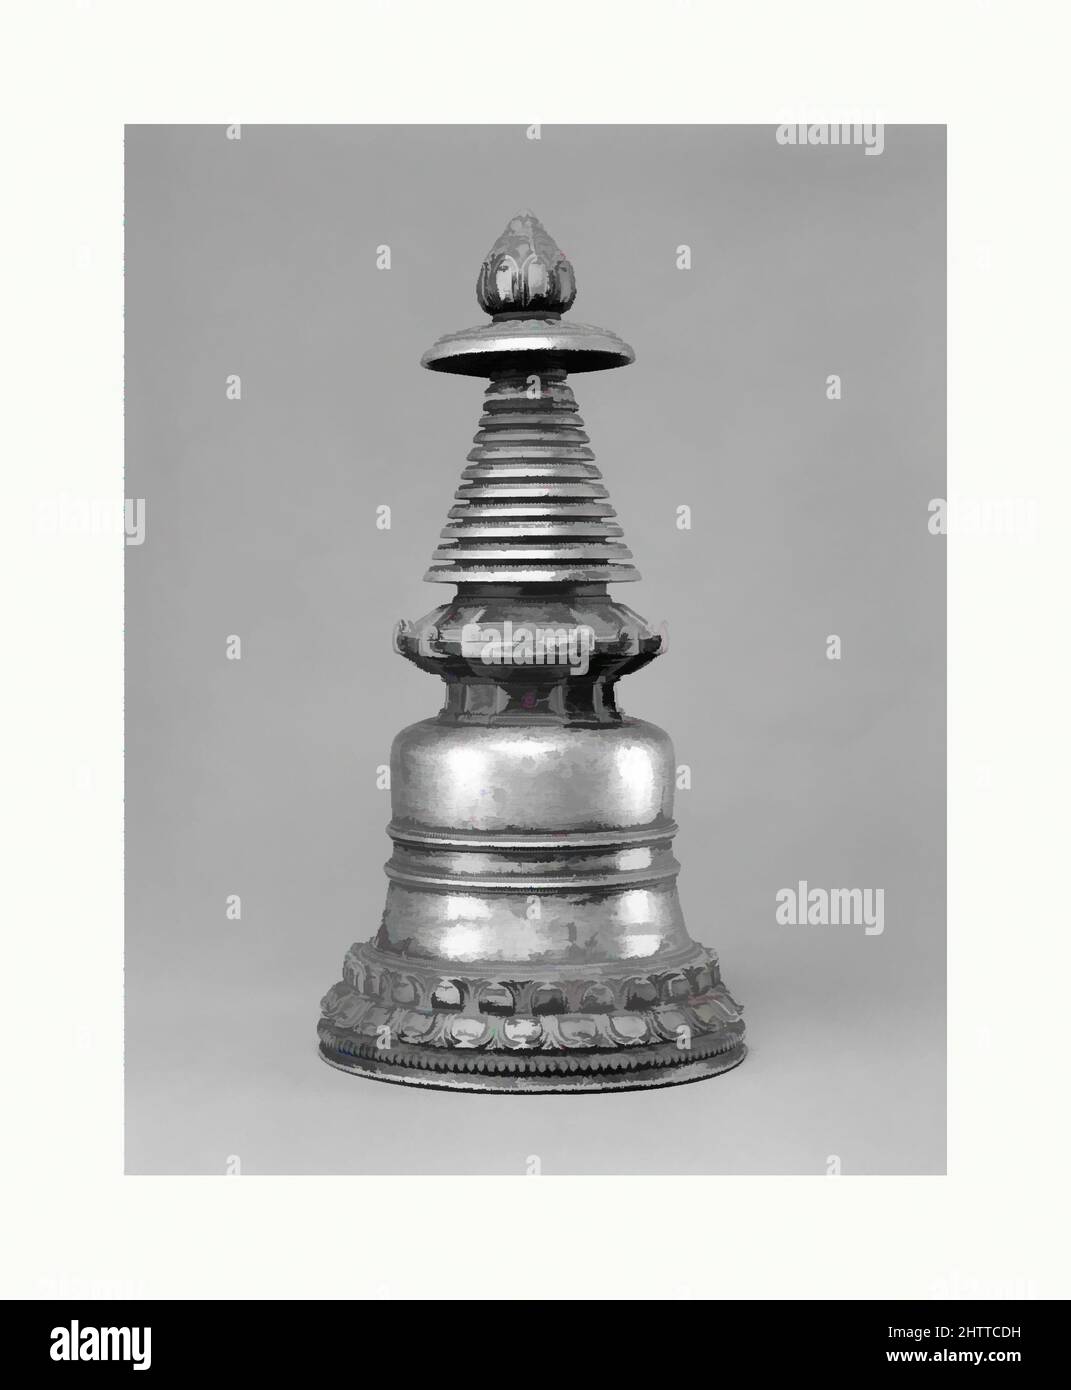 Art inspired by Stupa, 13th century, Western Tibet, Brass, H. 8 5/16 in. (21.1 cm), Metalwork, Commemorative stupas (Tibetan: chorten) are the oldest symbols of Buddhism and came to be emblematic of both the dharma and of the Buddha himself. Repositories for relics associated with the, Classic works modernized by Artotop with a splash of modernity. Shapes, color and value, eye-catching visual impact on art. Emotions through freedom of artworks in a contemporary way. A timeless message pursuing a wildly creative new direction. Artists turning to the digital medium and creating the Artotop NFT Stock Photo